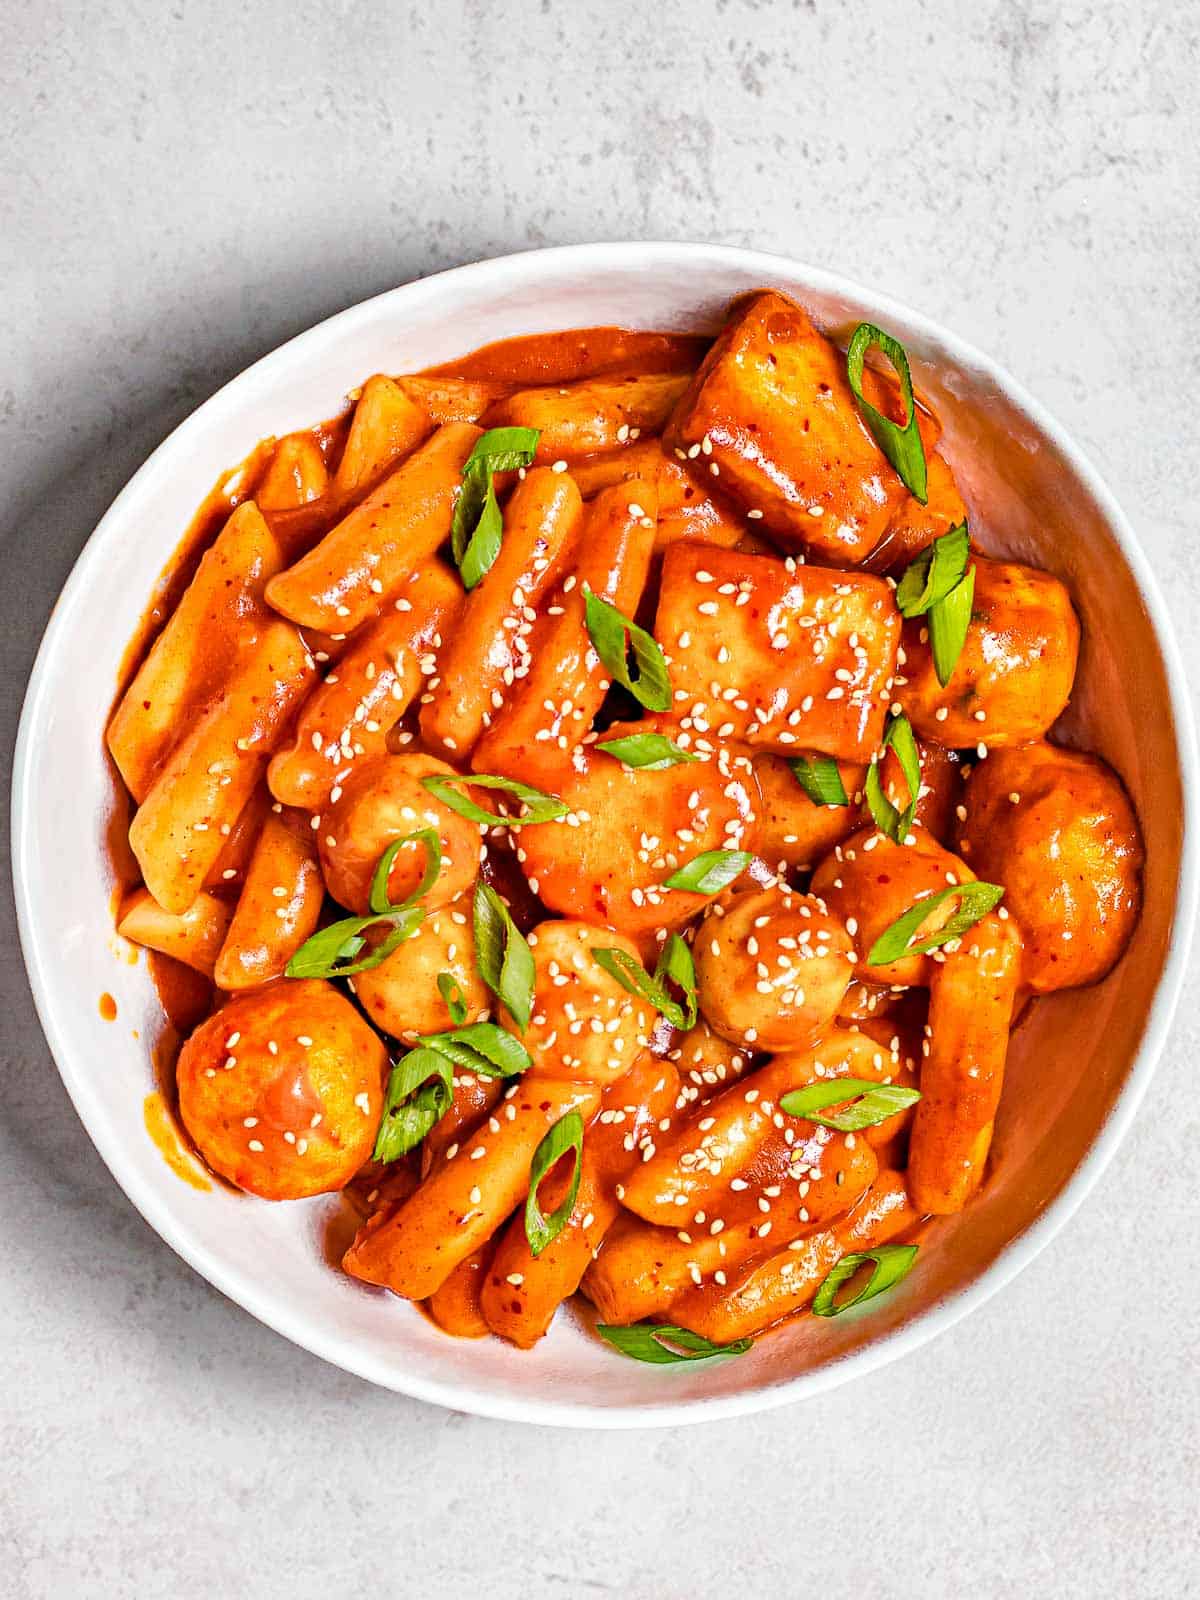 Spicy tteokbokki with fish cakes with scallions and sesame seeds.